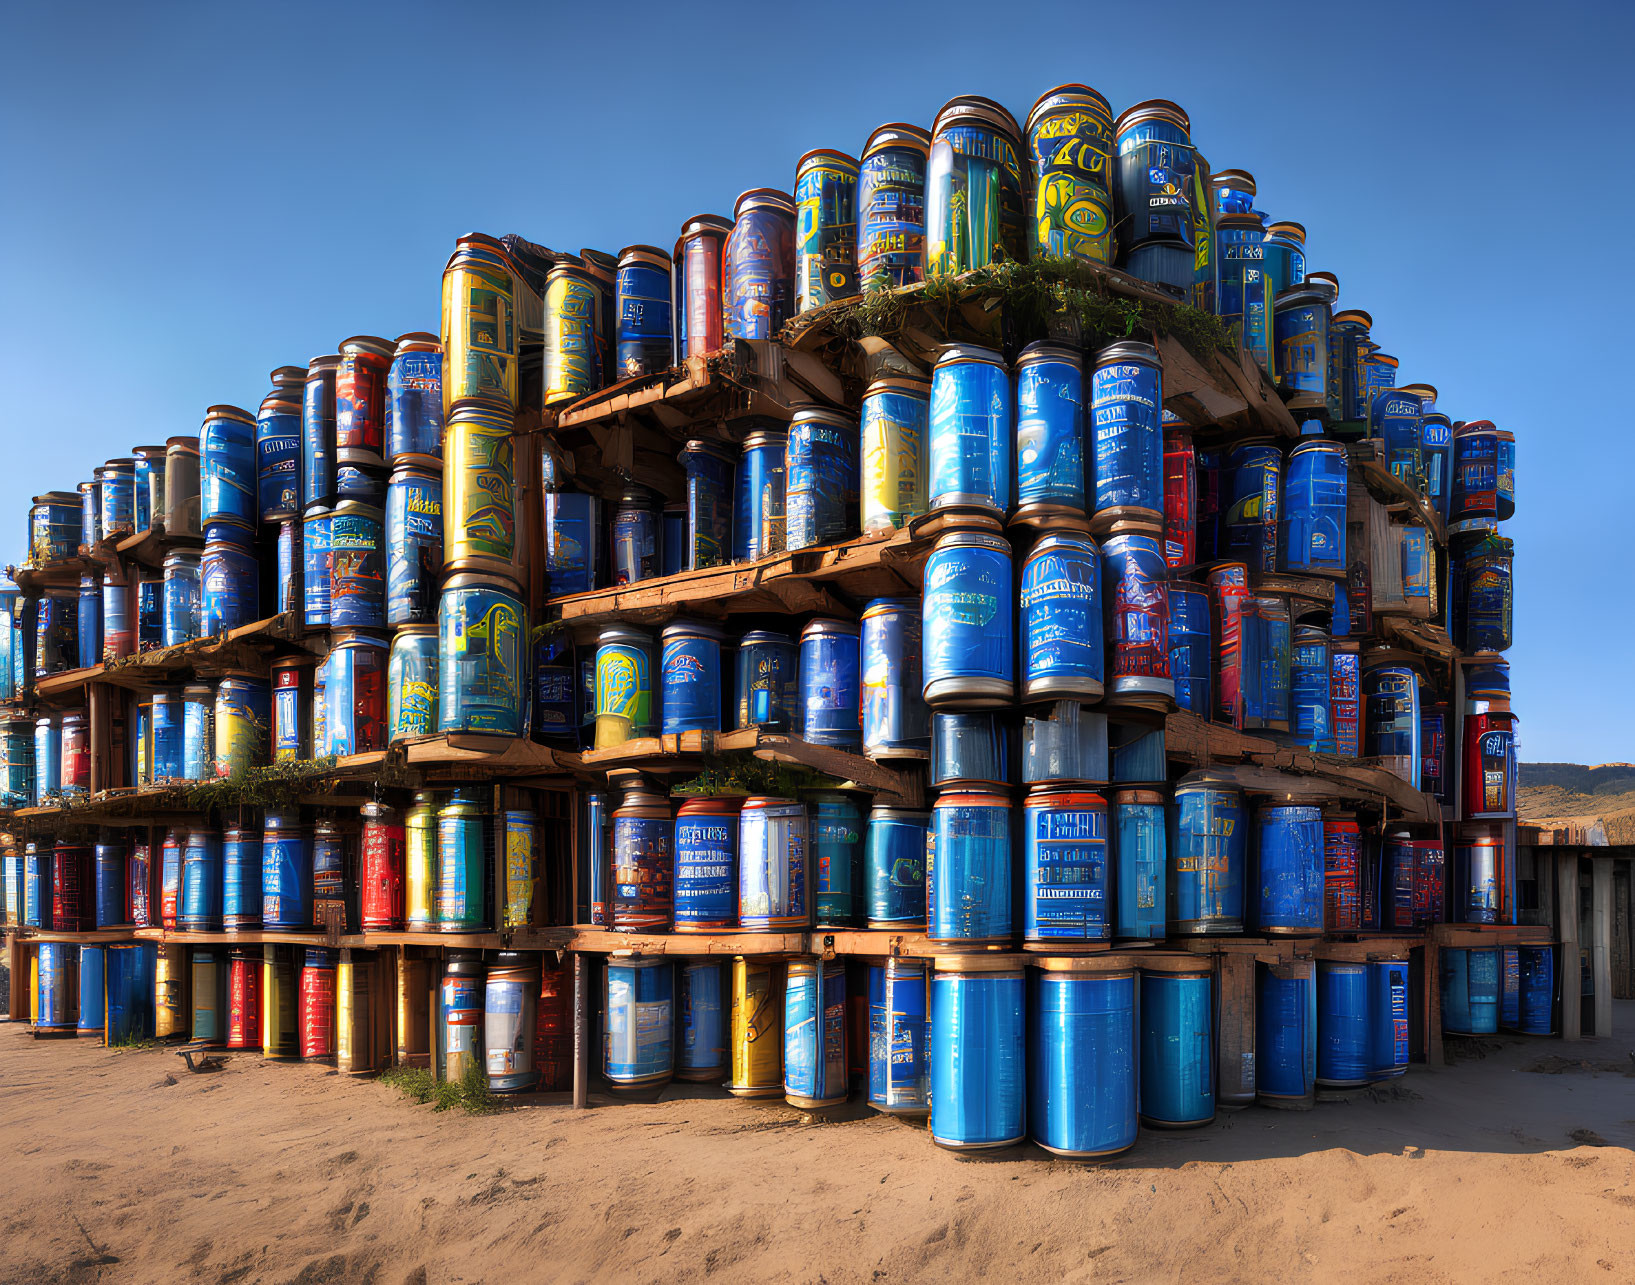 Colorful oil drums stacked in pyramid shape on sandy ground